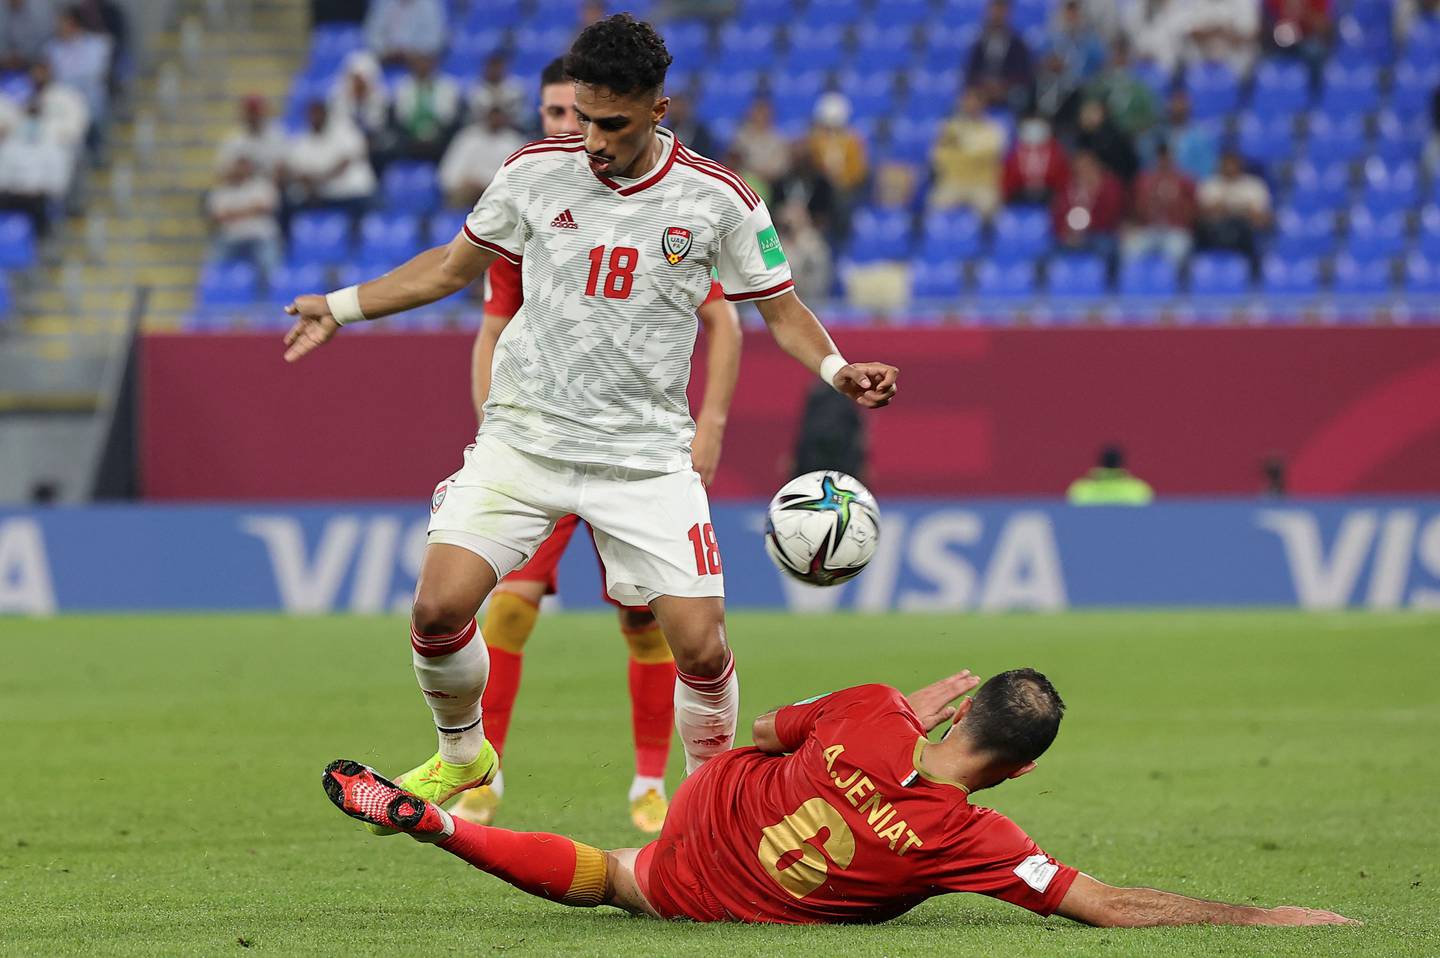 Abdullah Ramadan is a key midfielder for the UAE but has suffered from injury issues. AFP